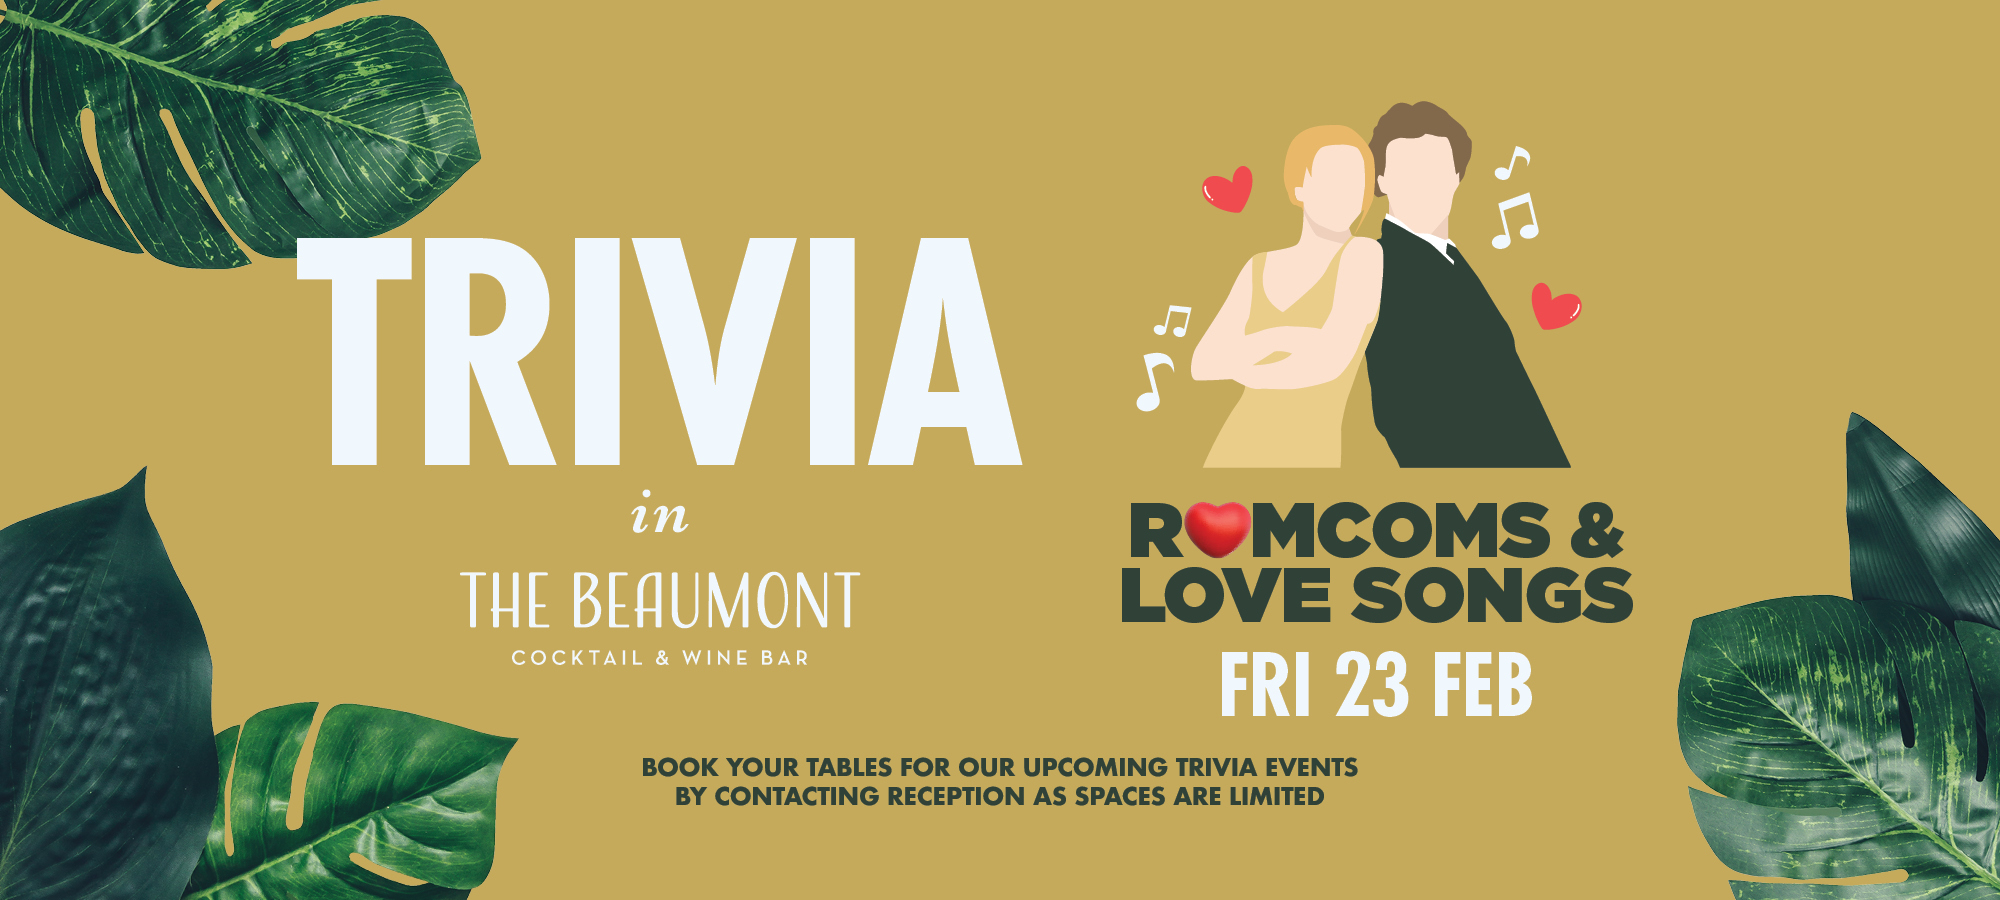 Trivia in The Beaumont – Rom-Com